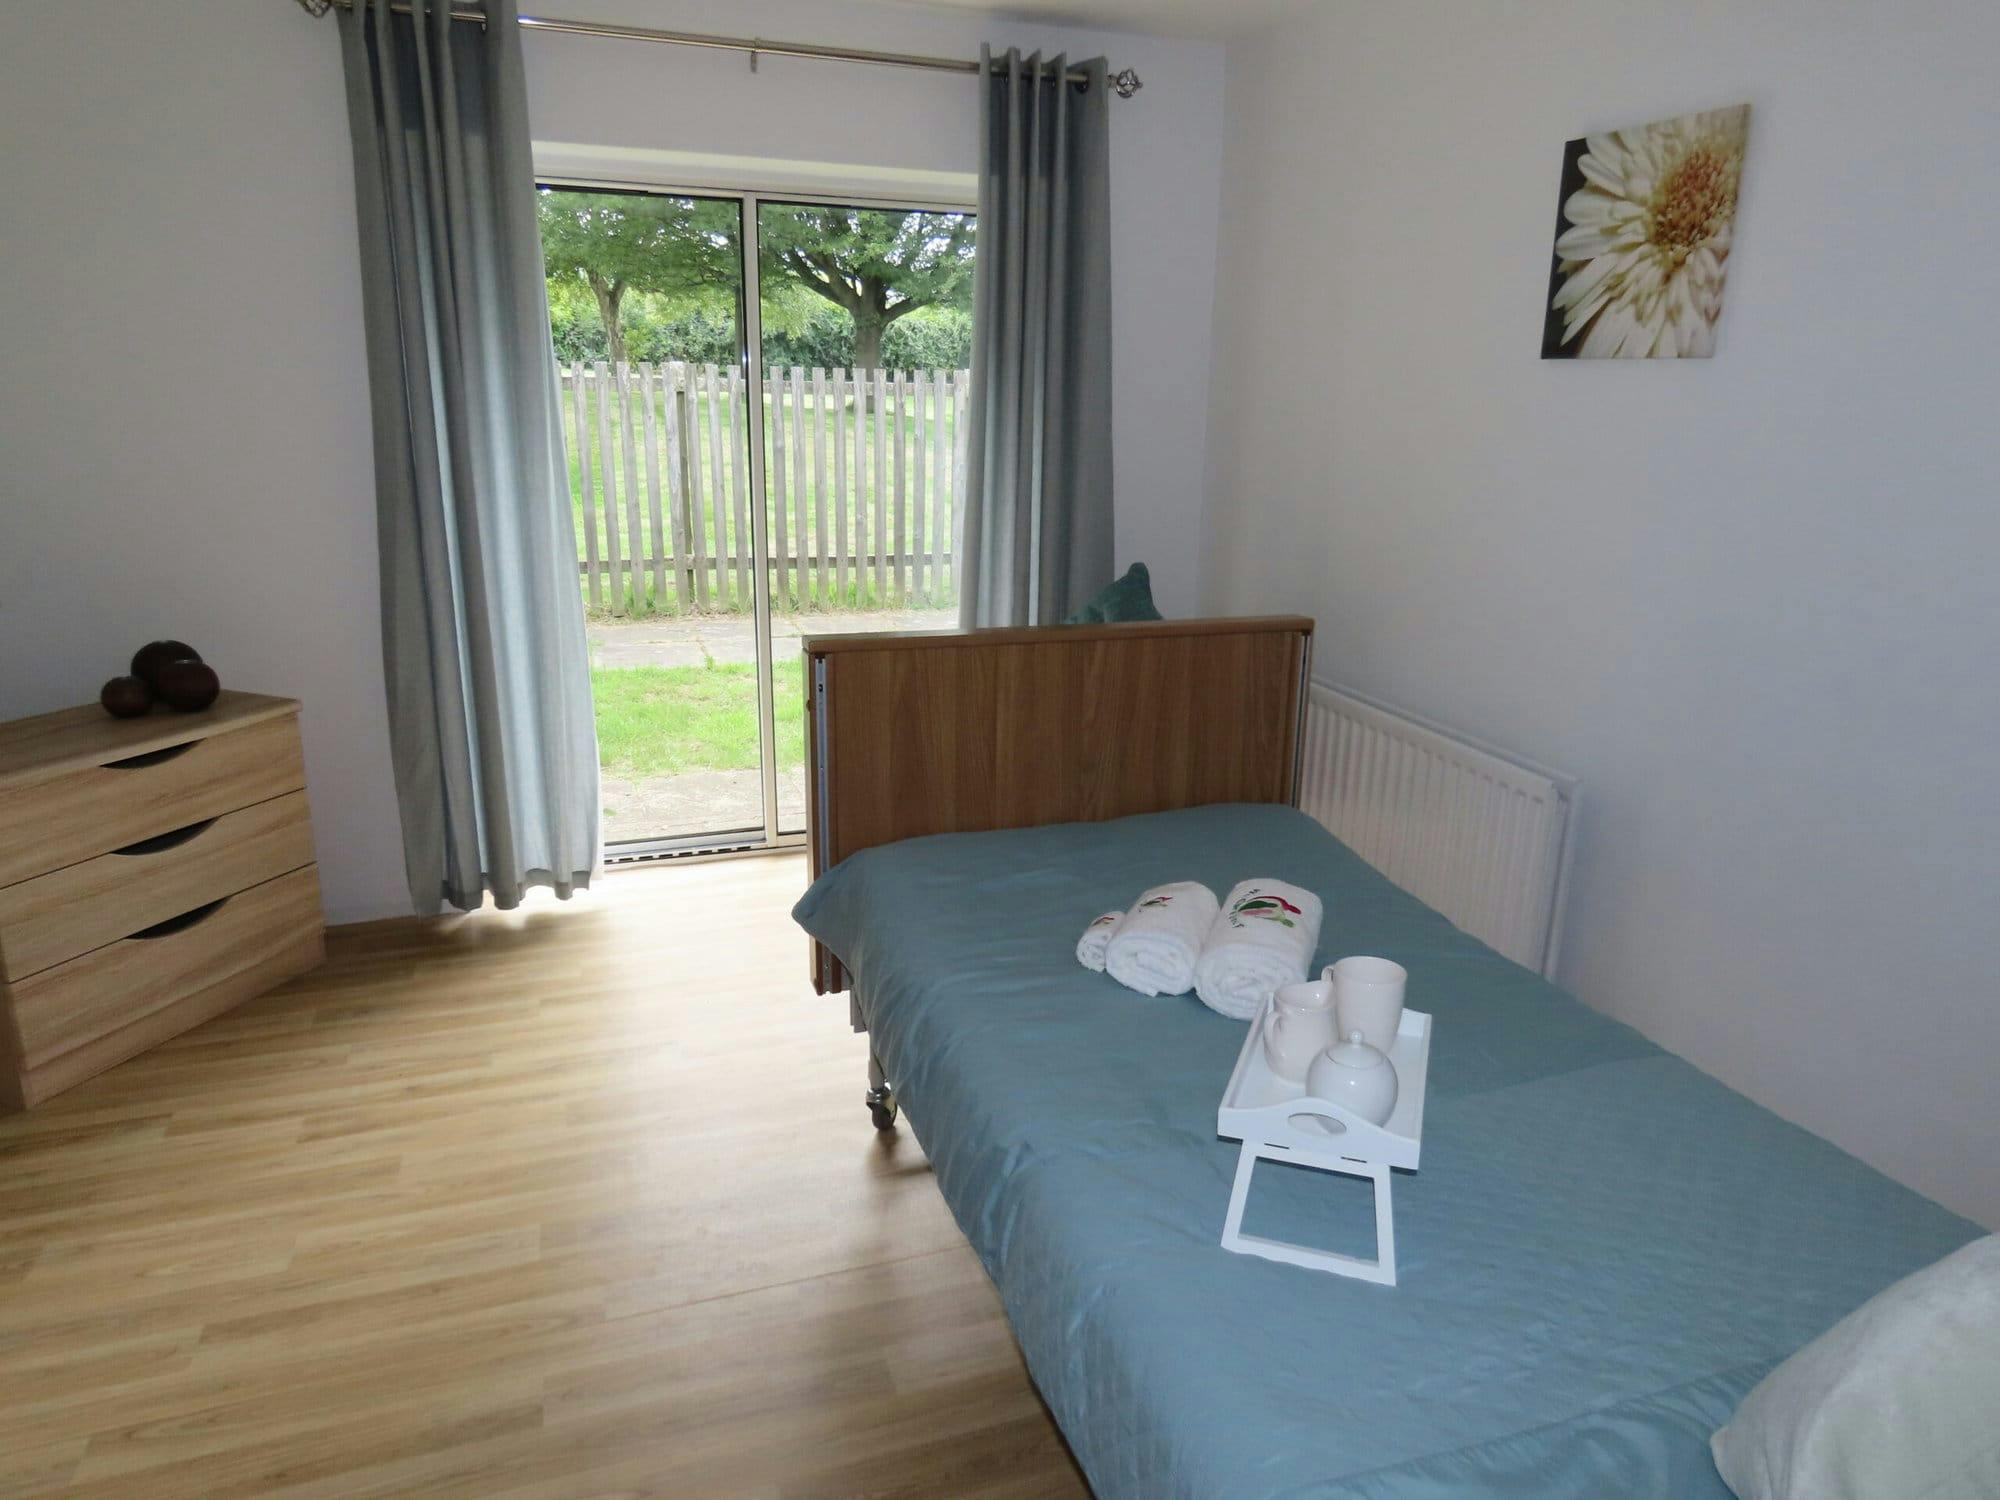 Bedroom at Knowles Court Care Home, Bradford, West Yorkshire